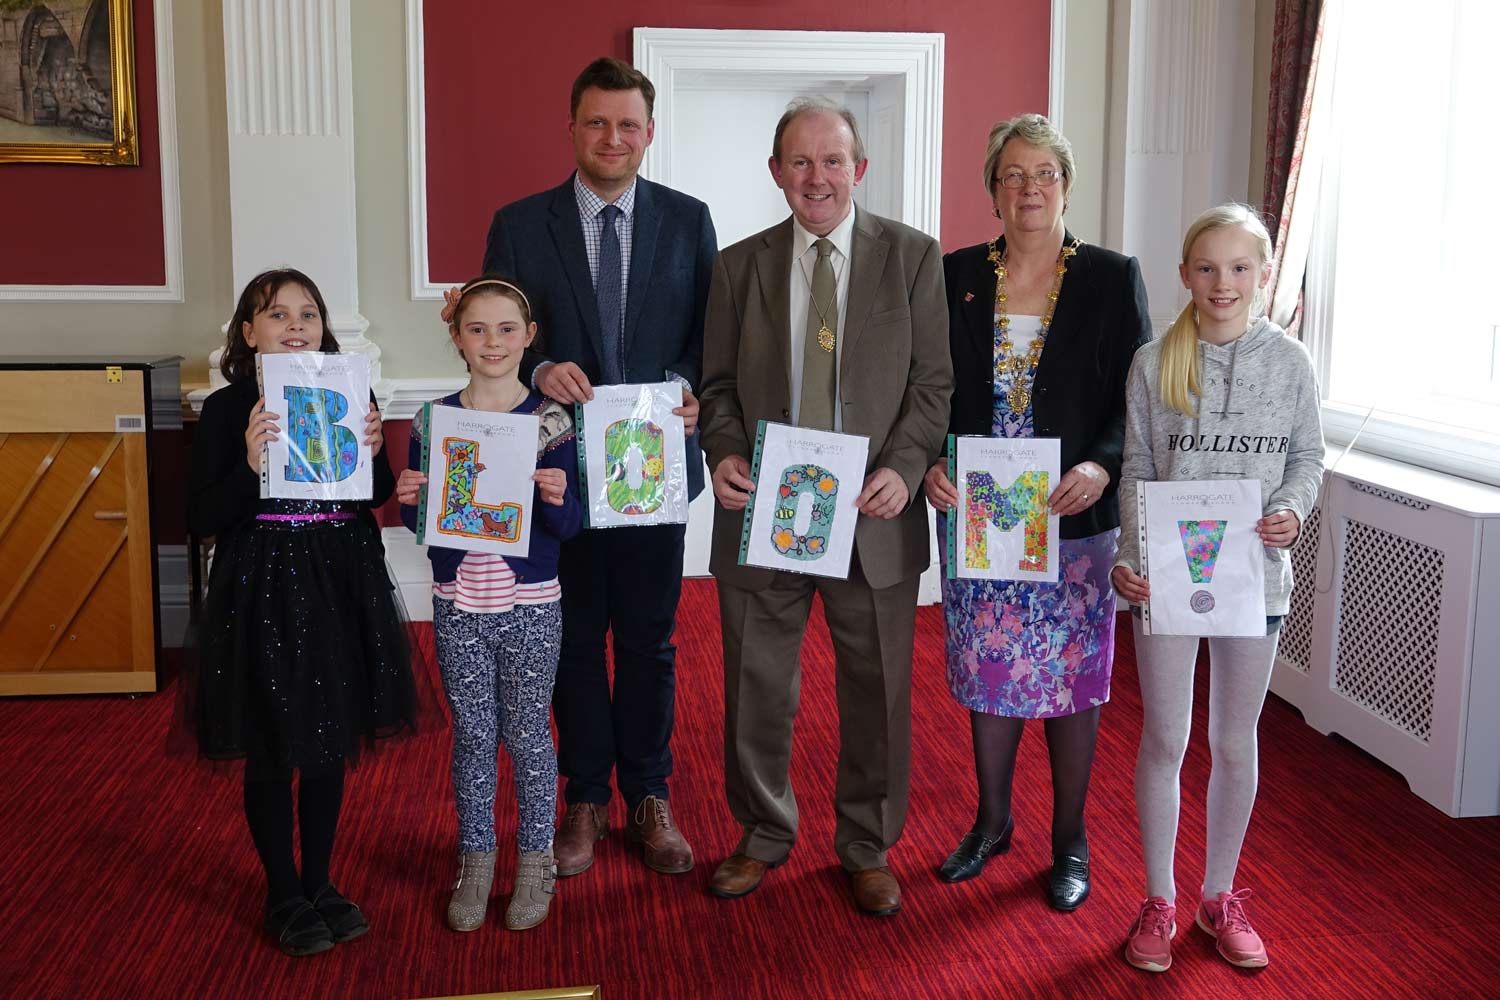 Children's in Bloom Art Awards held at The Granby Care Home